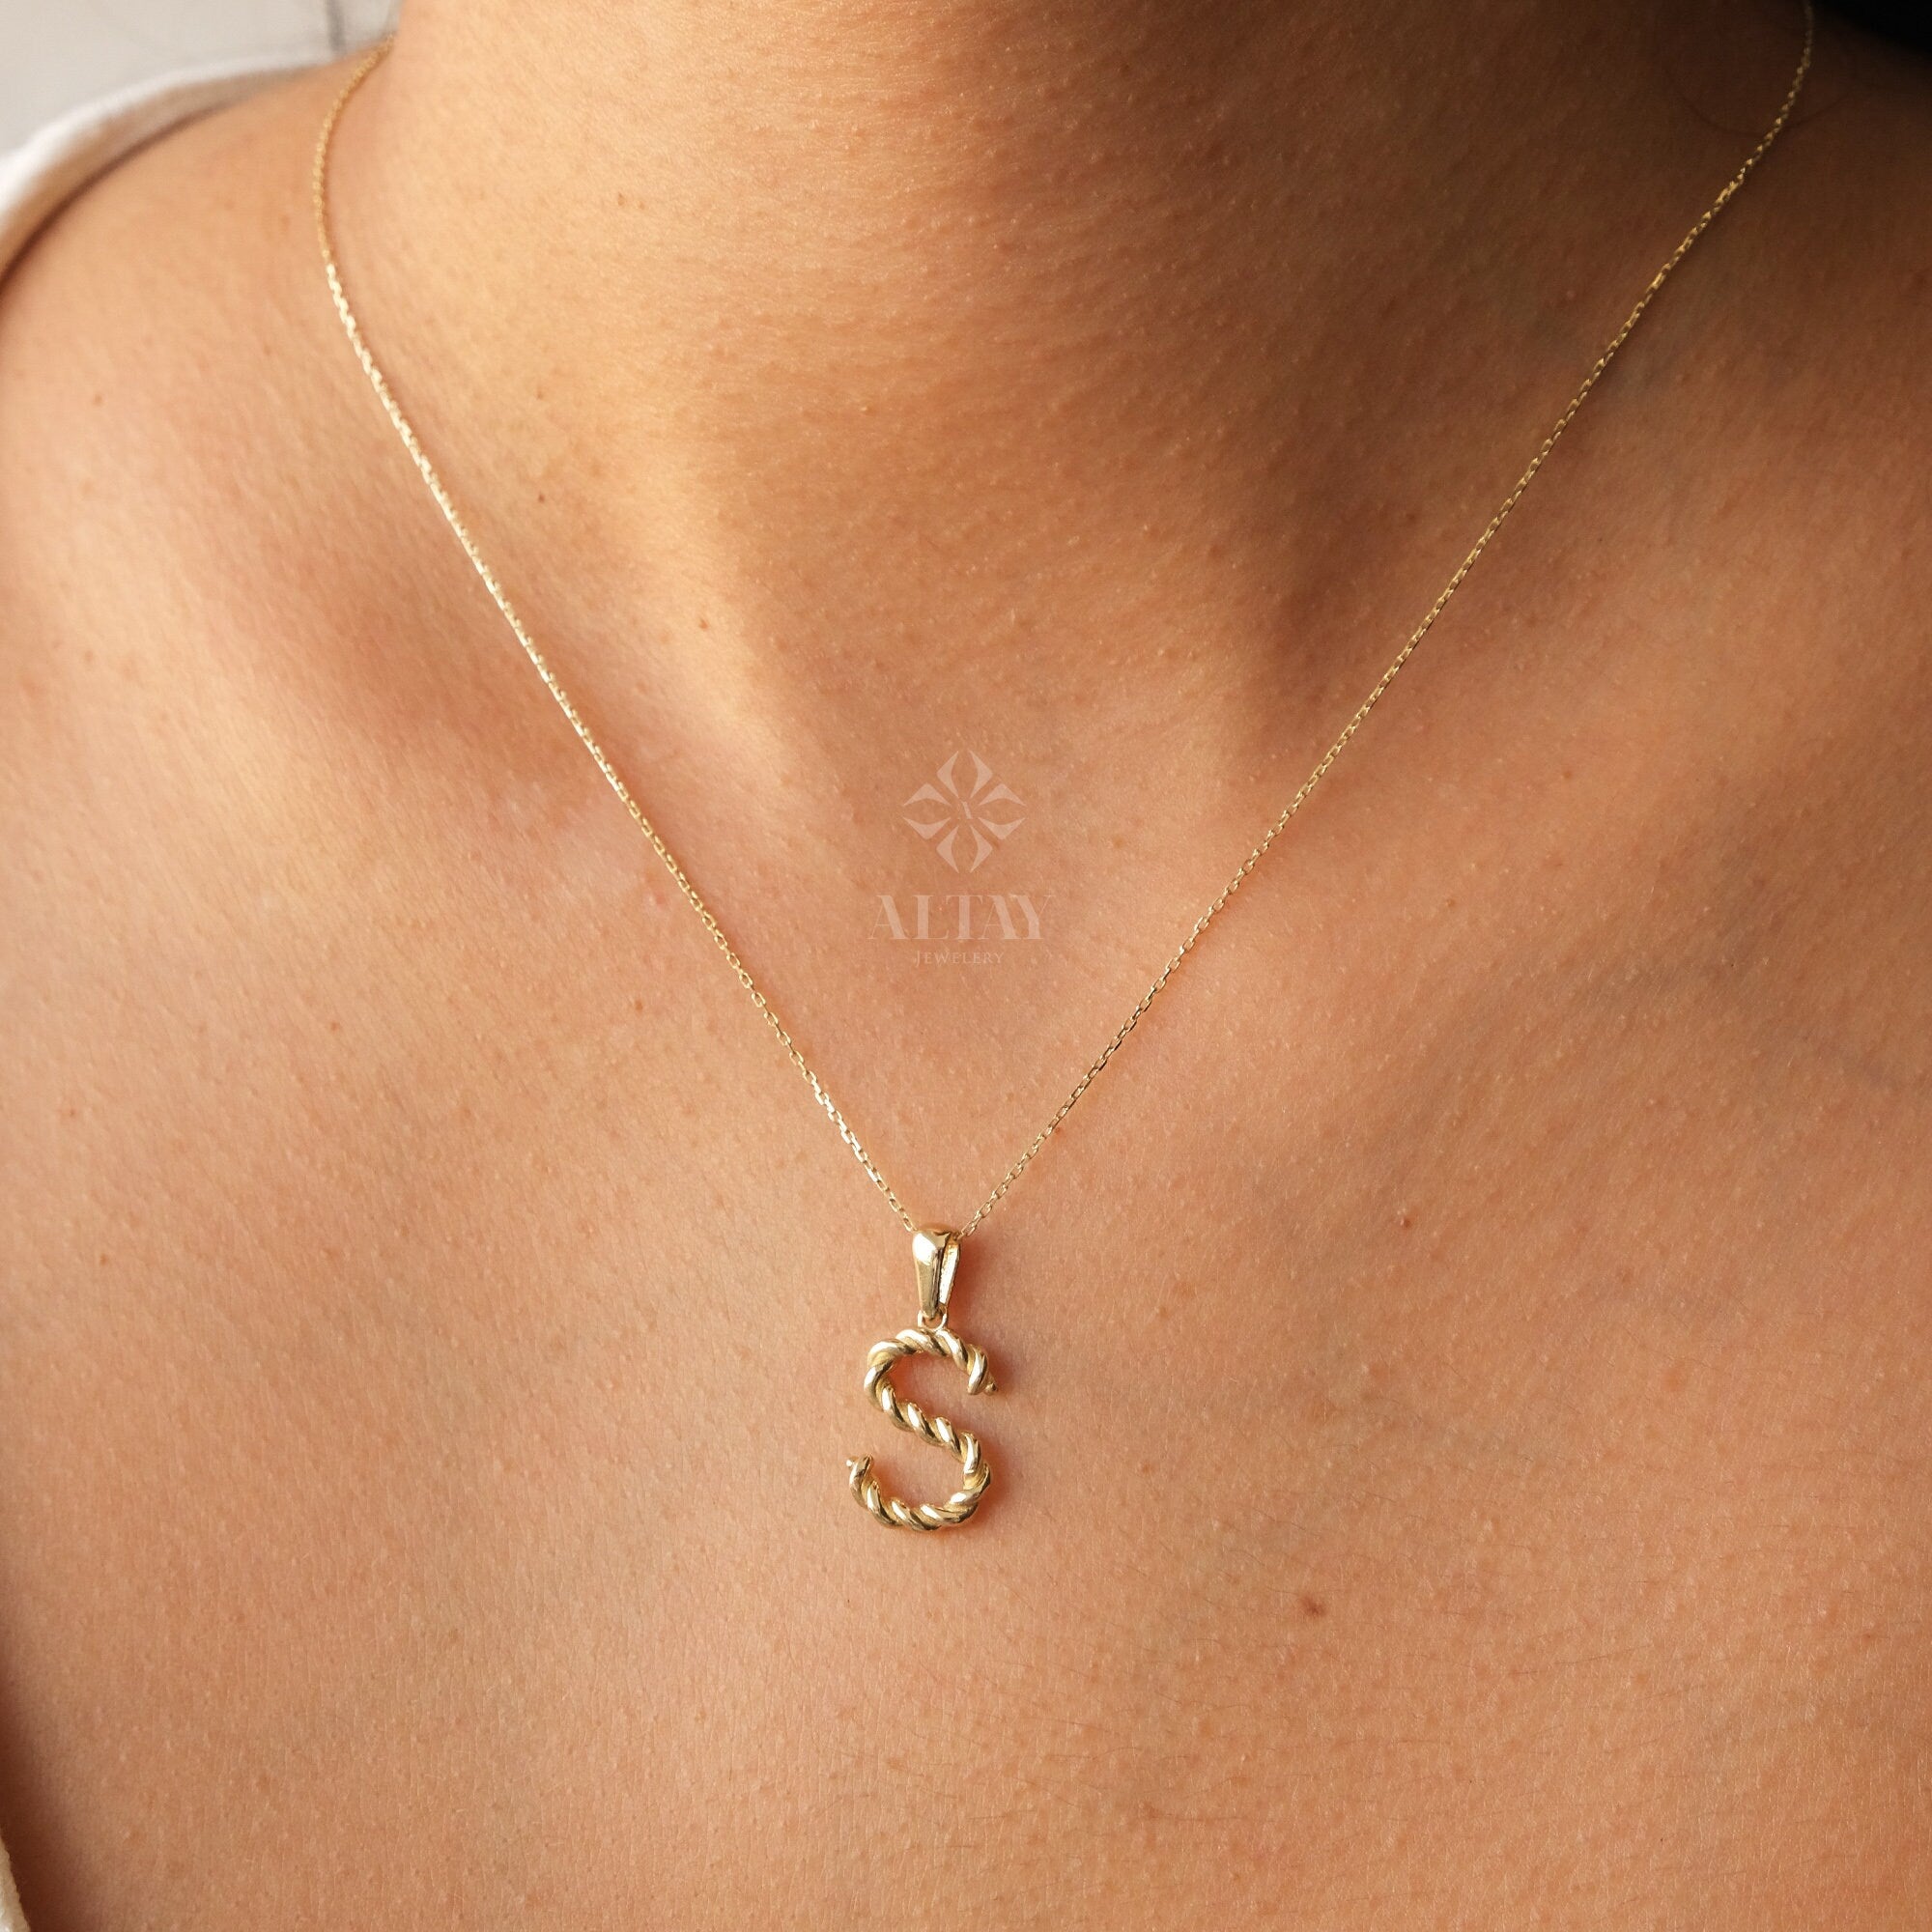 14K Gold Initial Necklace, Rope Gold Letter Necklace, Custom Personalized Necklace, Name Letter Necklace, Initial Charm Pendant, Christmas